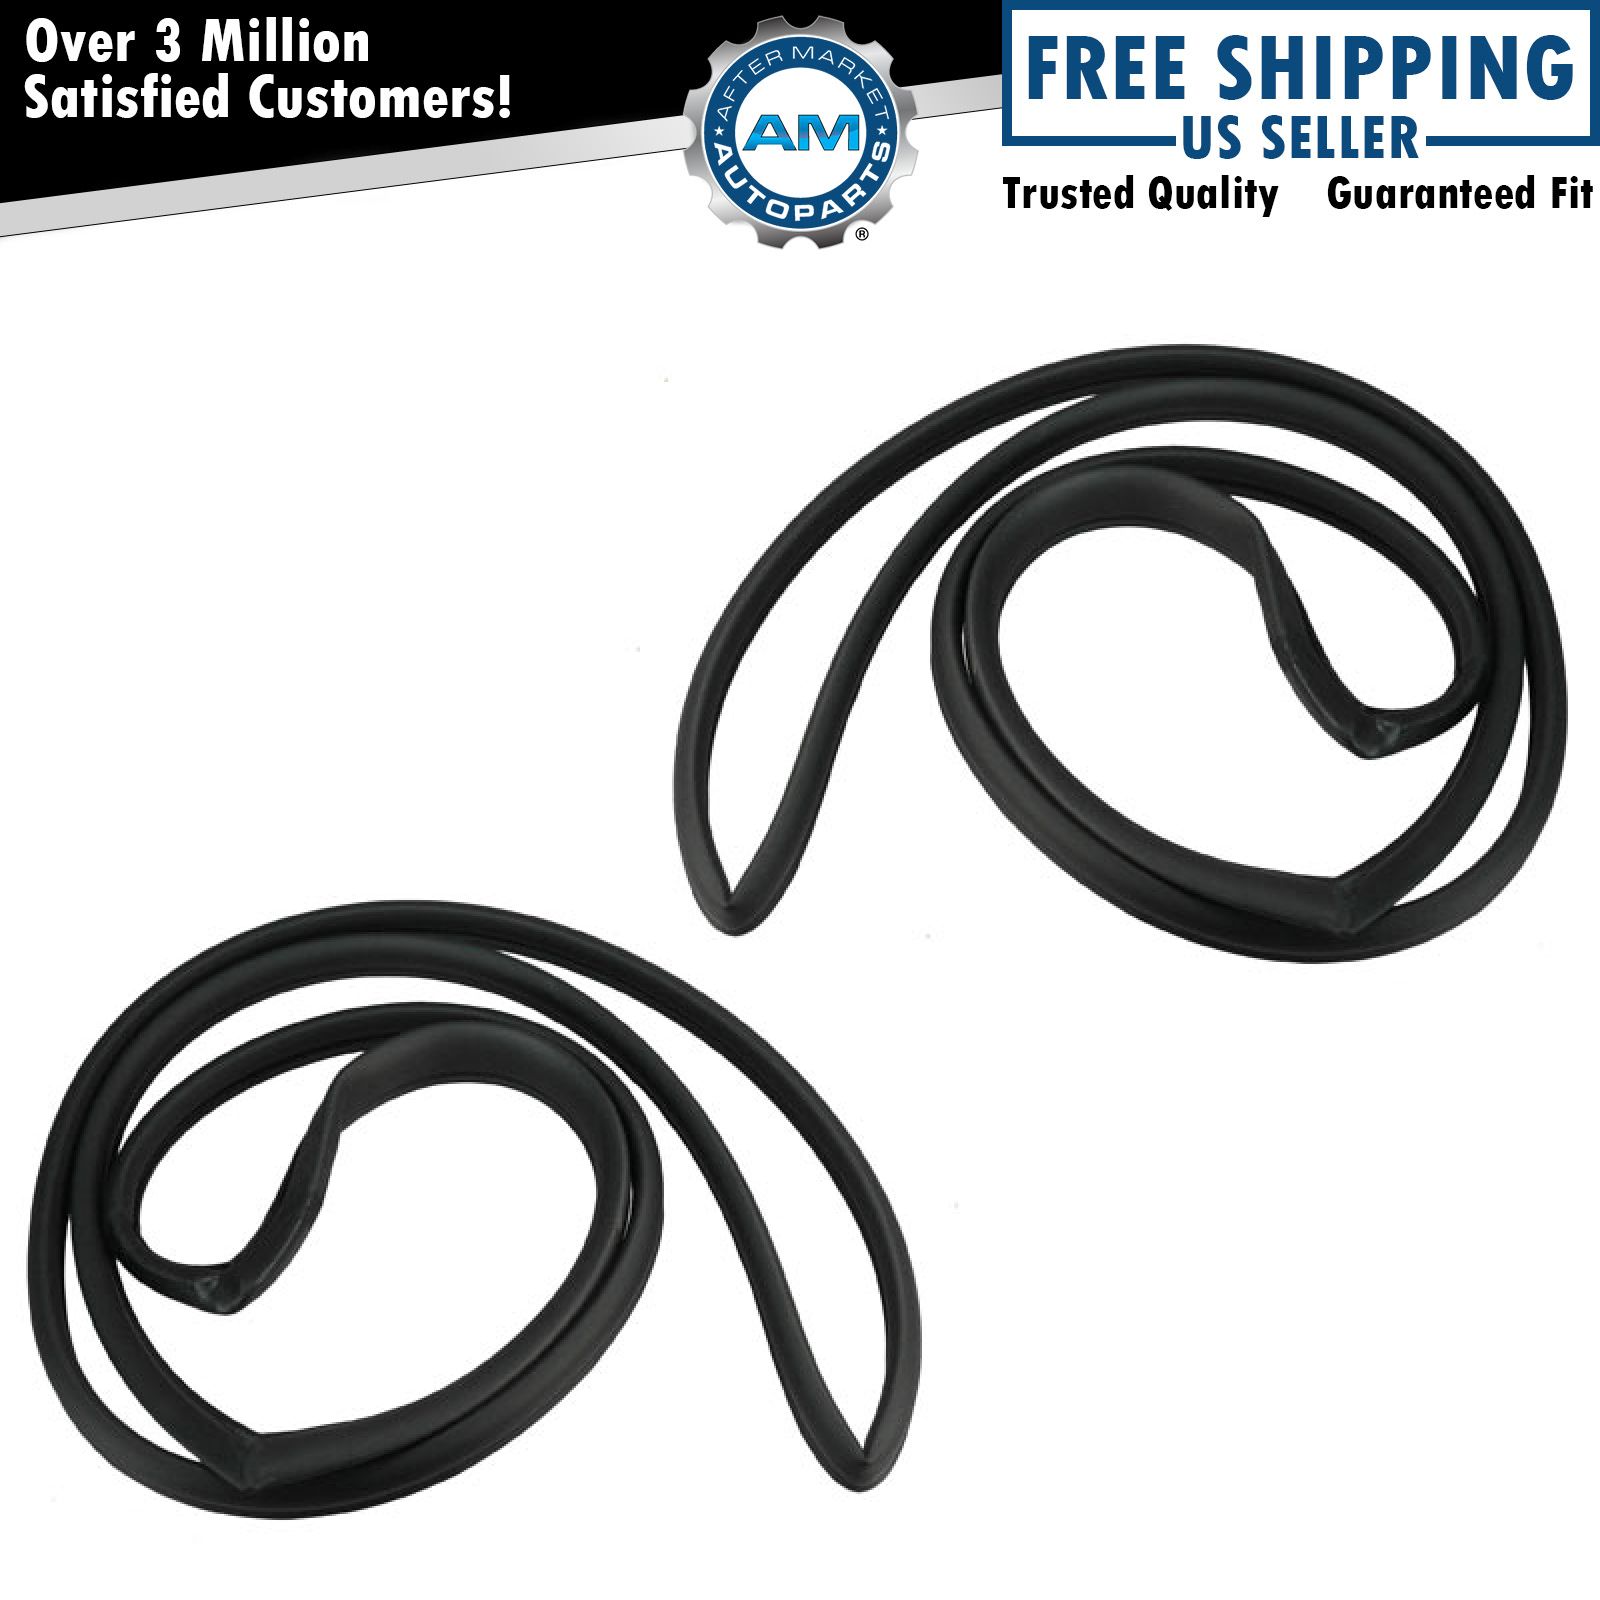 Rear Door Weatherstrips Rubber Seal for Buick Chevy Oldsmobile Pontiac